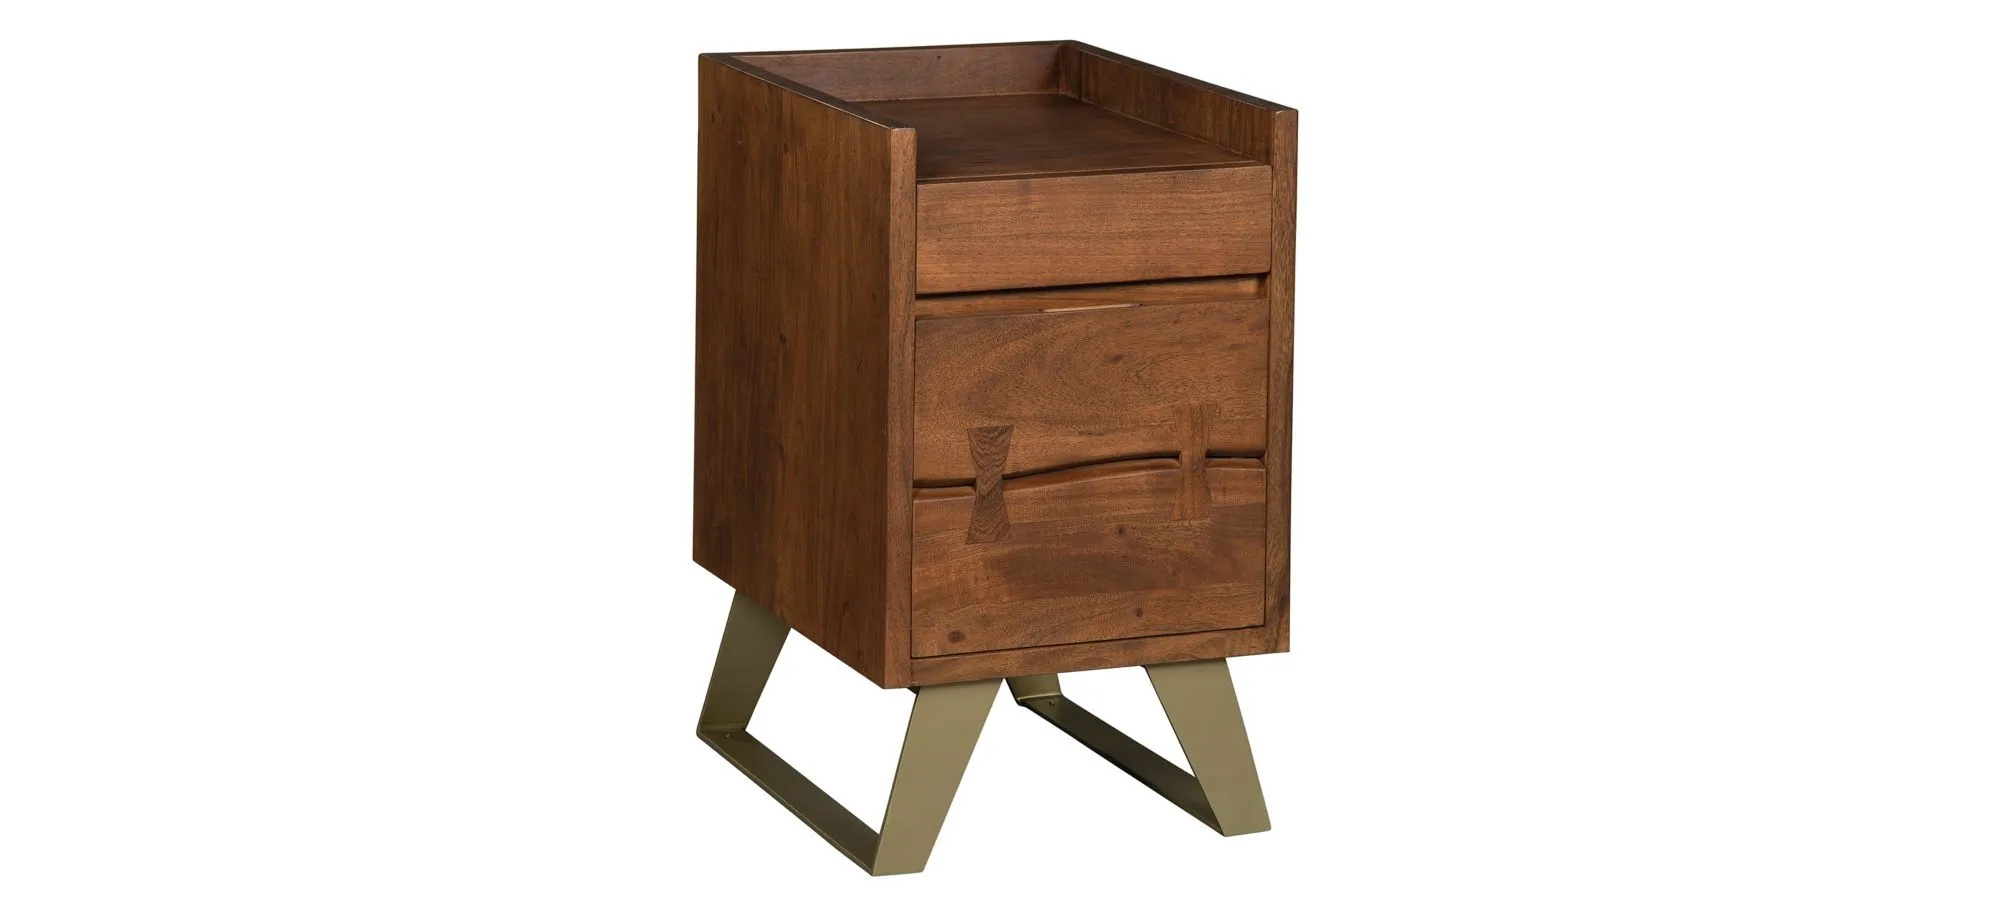 Hekman File Cabinet in SPECIAL RESERVE by Hekman Furniture Company